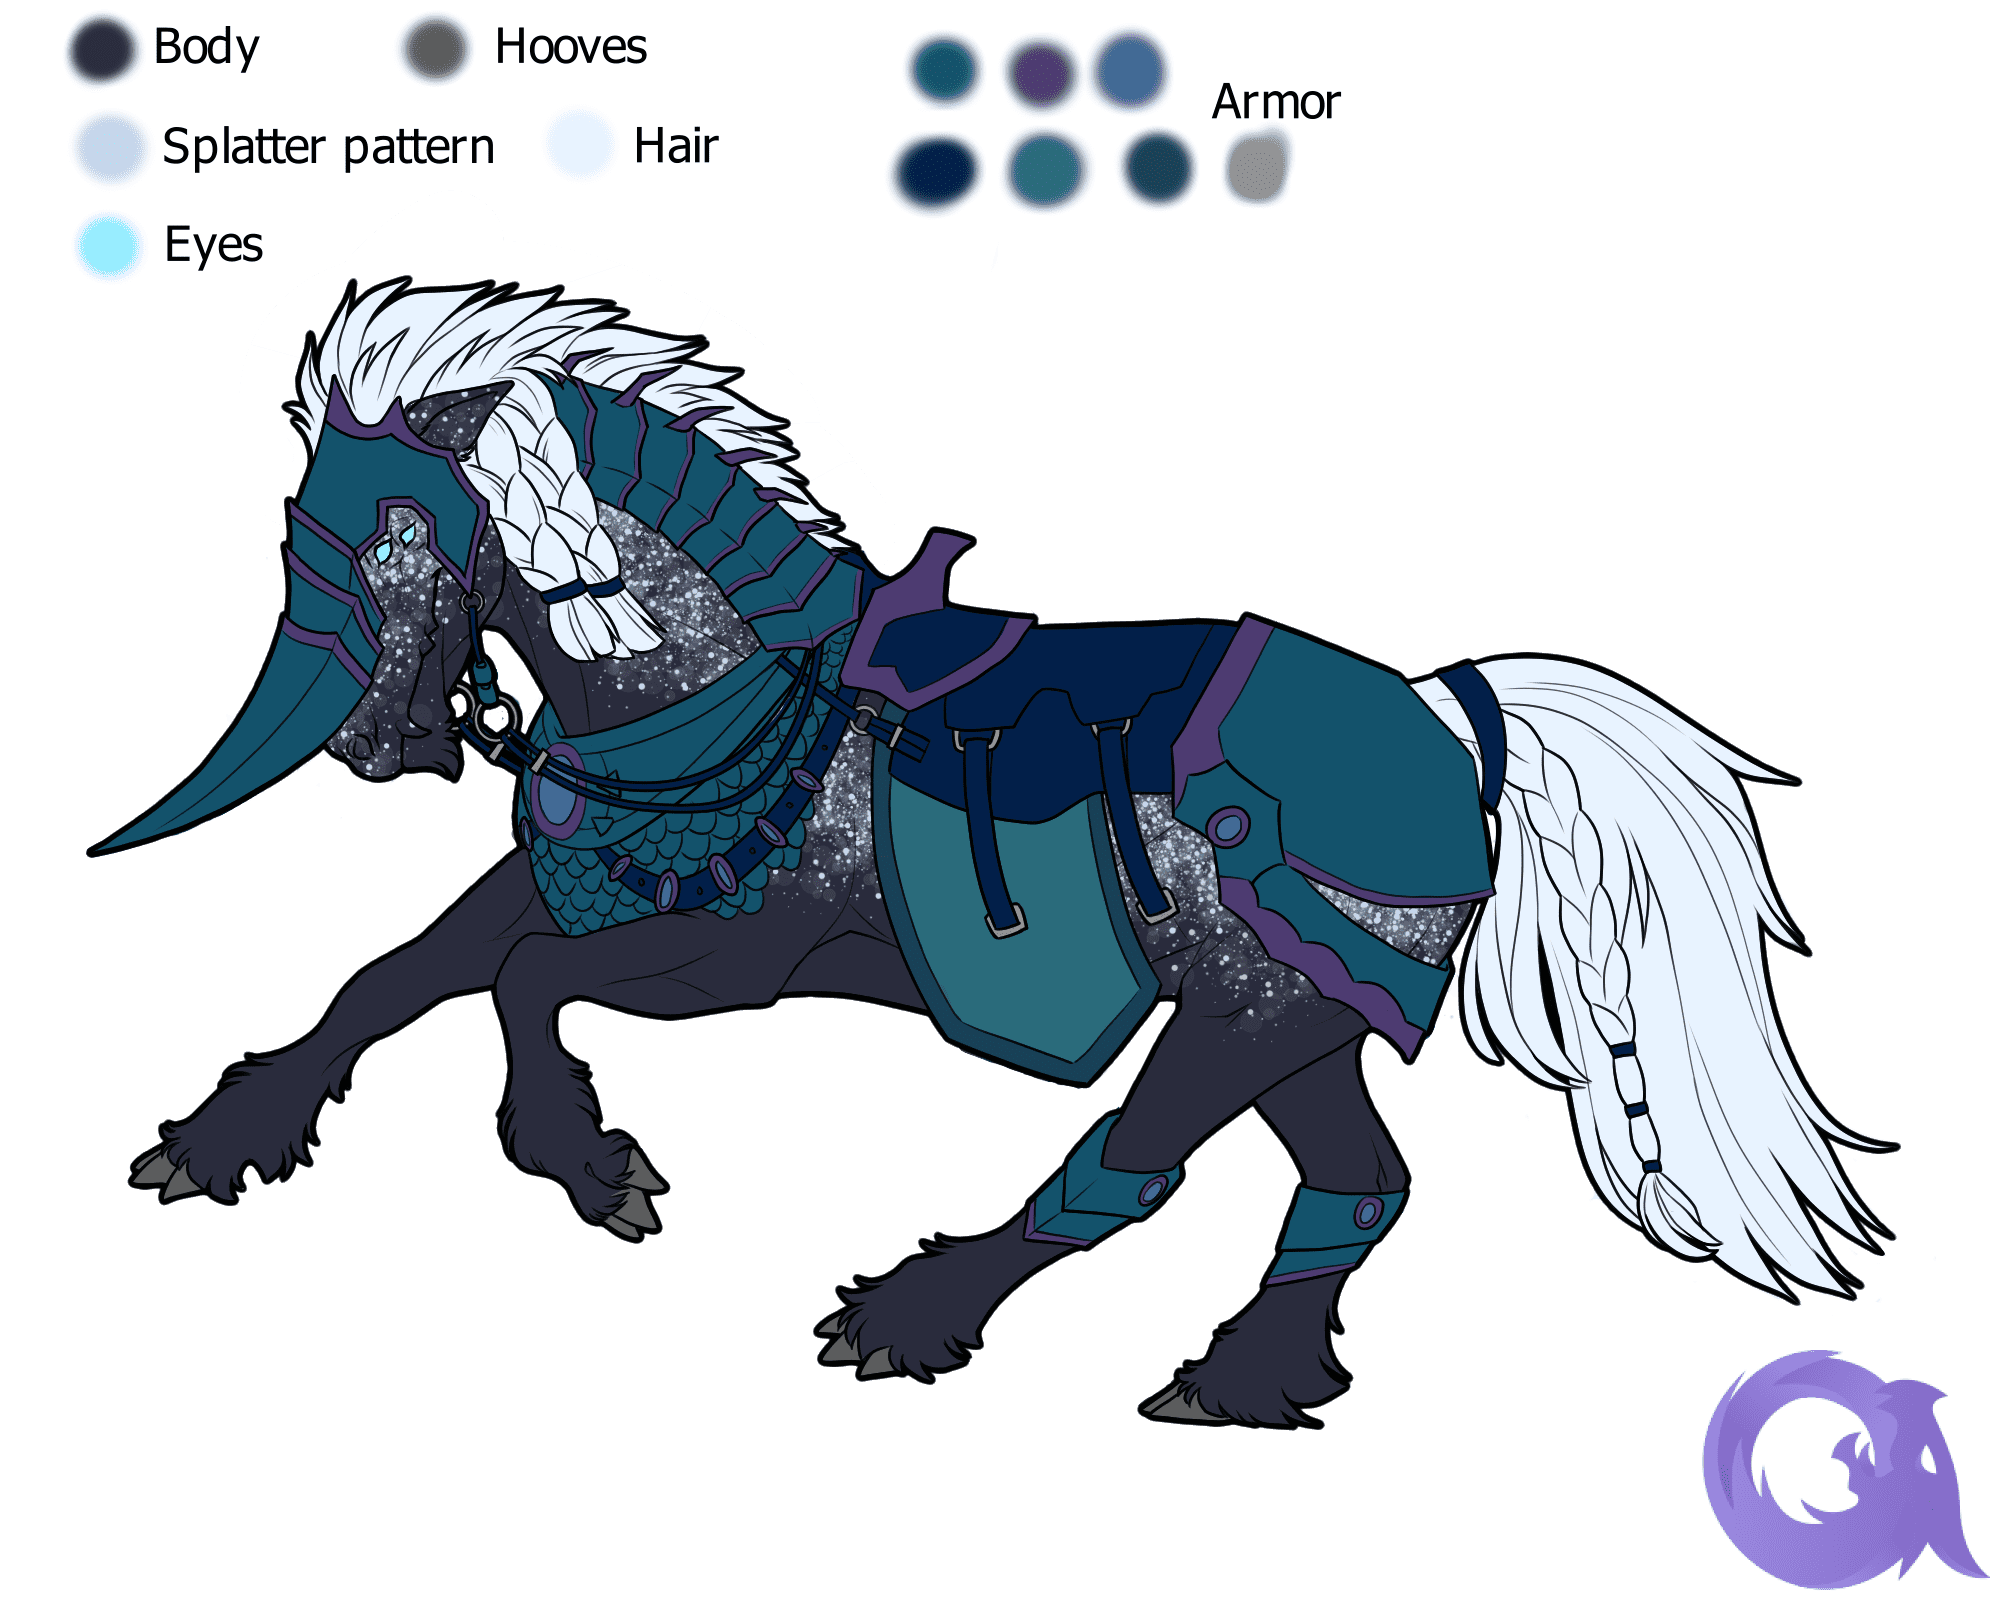 Night Stallion (not official name)